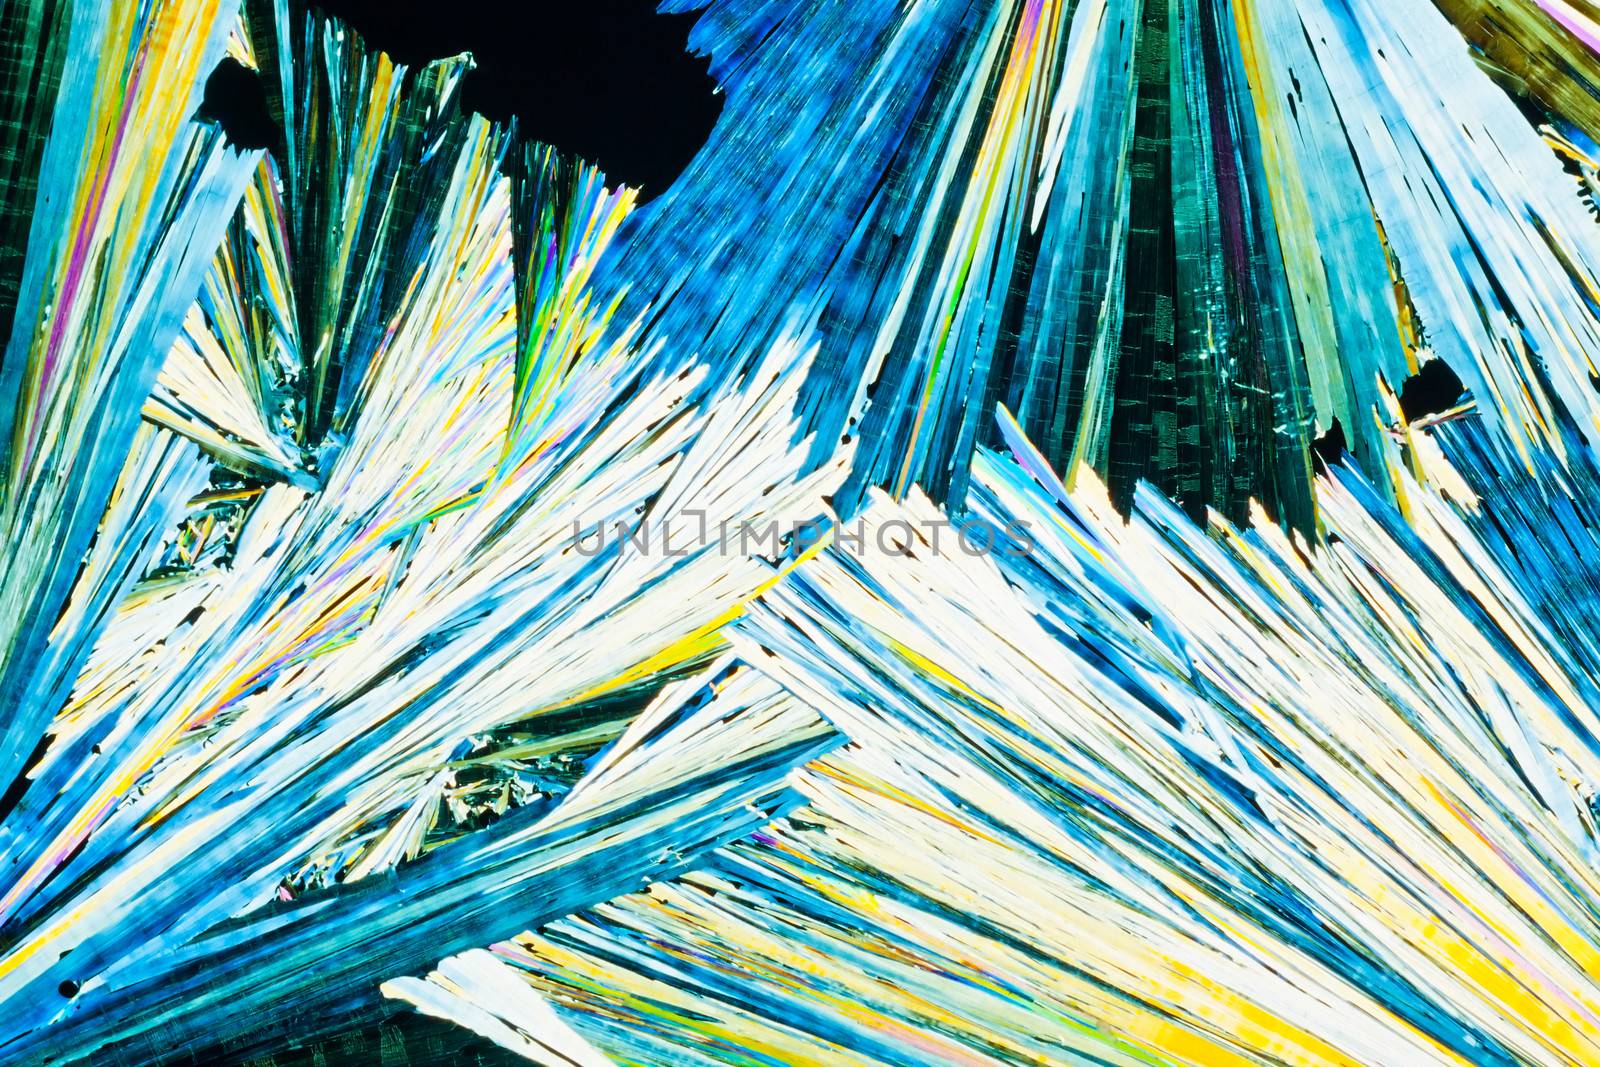 Urea or carbamide crystals in polarized light by PiLens